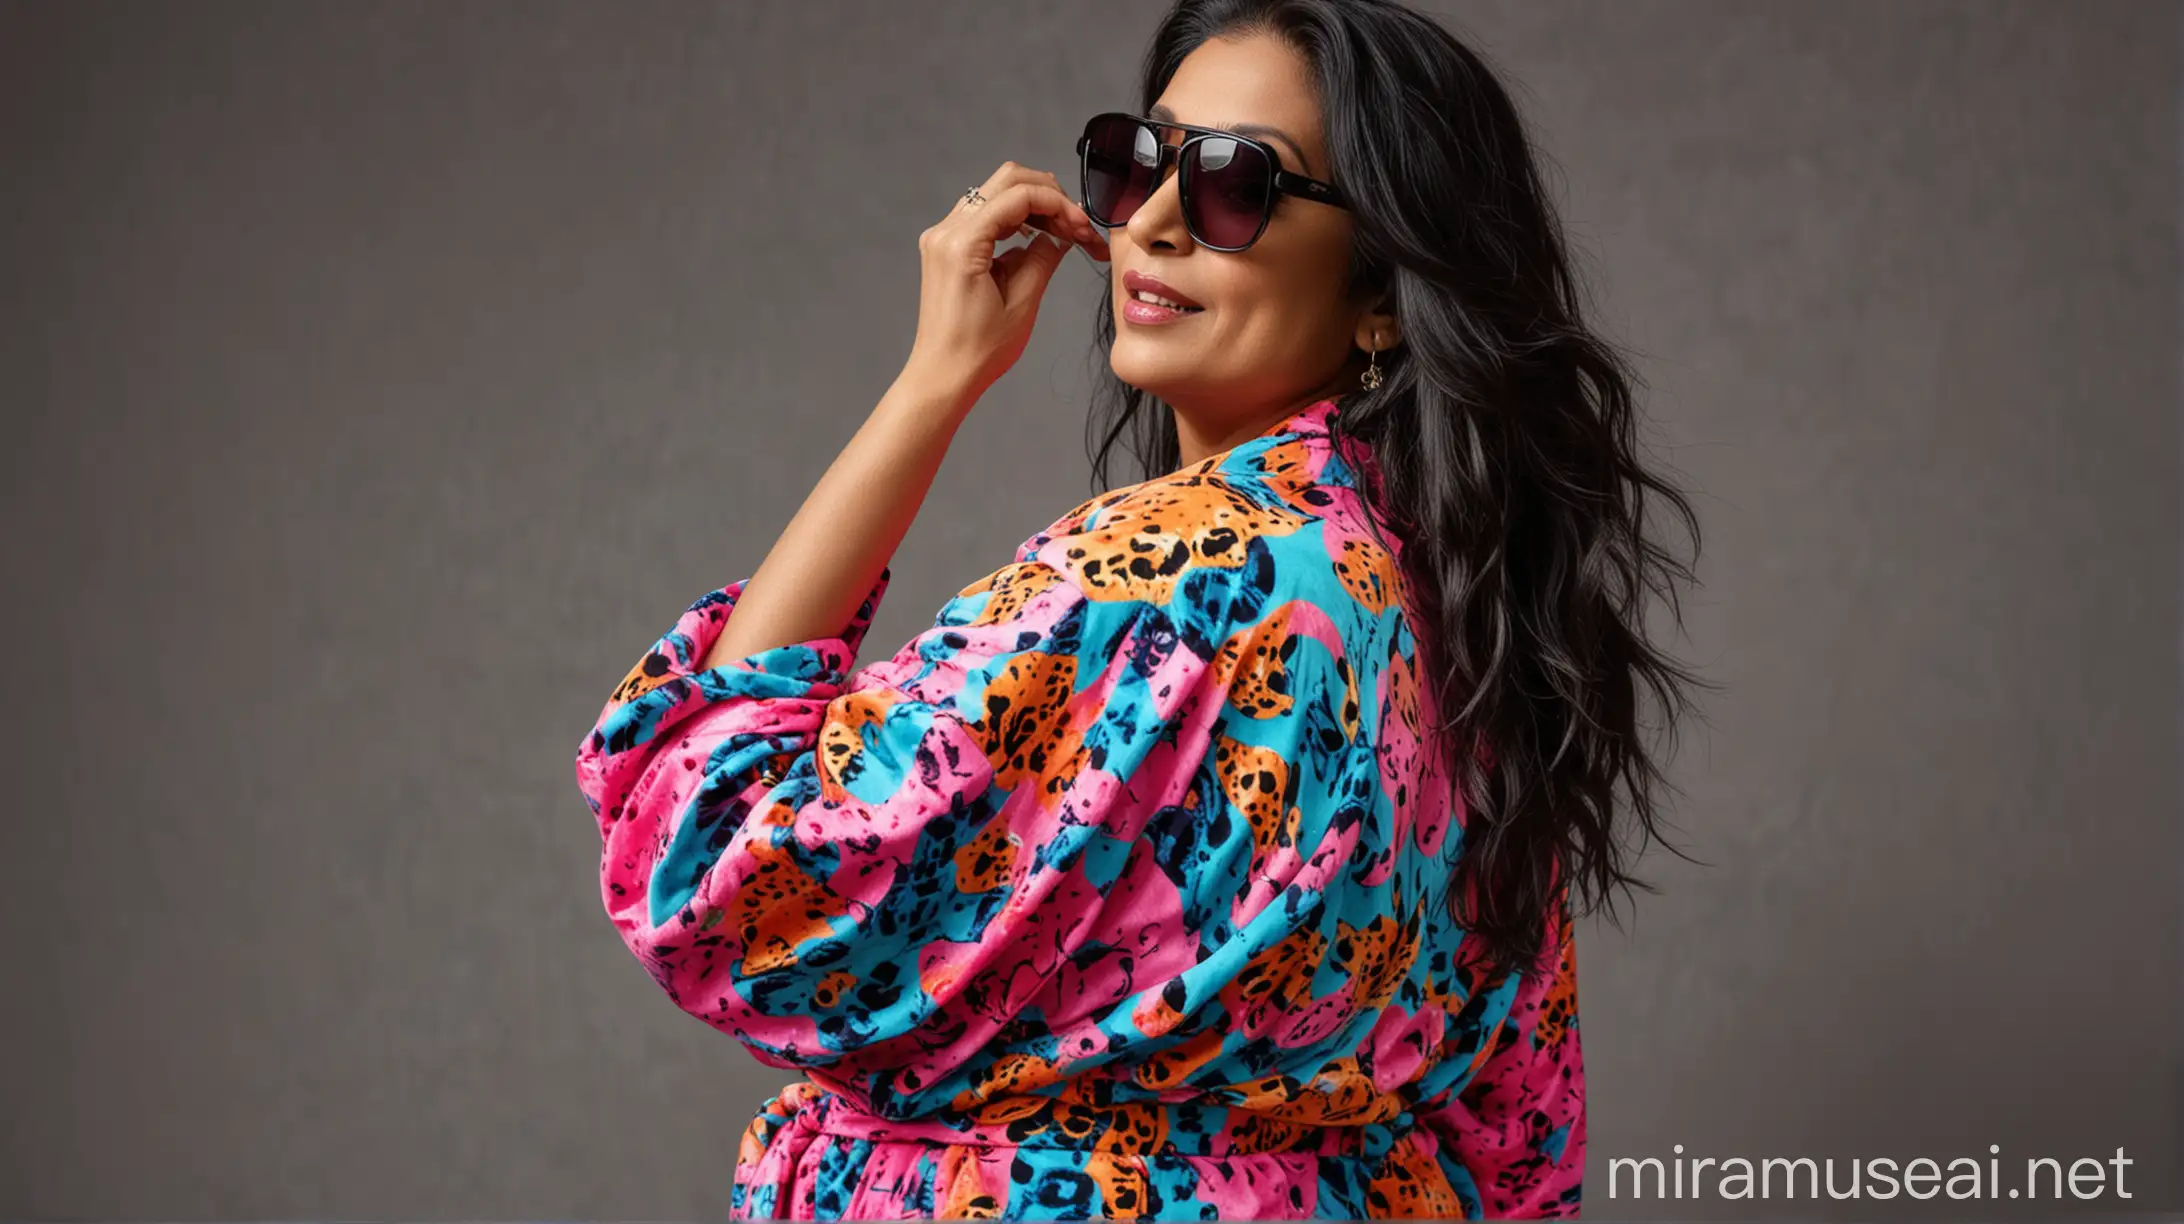 Mature Indian Woman in Neon Velvet Panther Print Bathrobe and Sunglasses